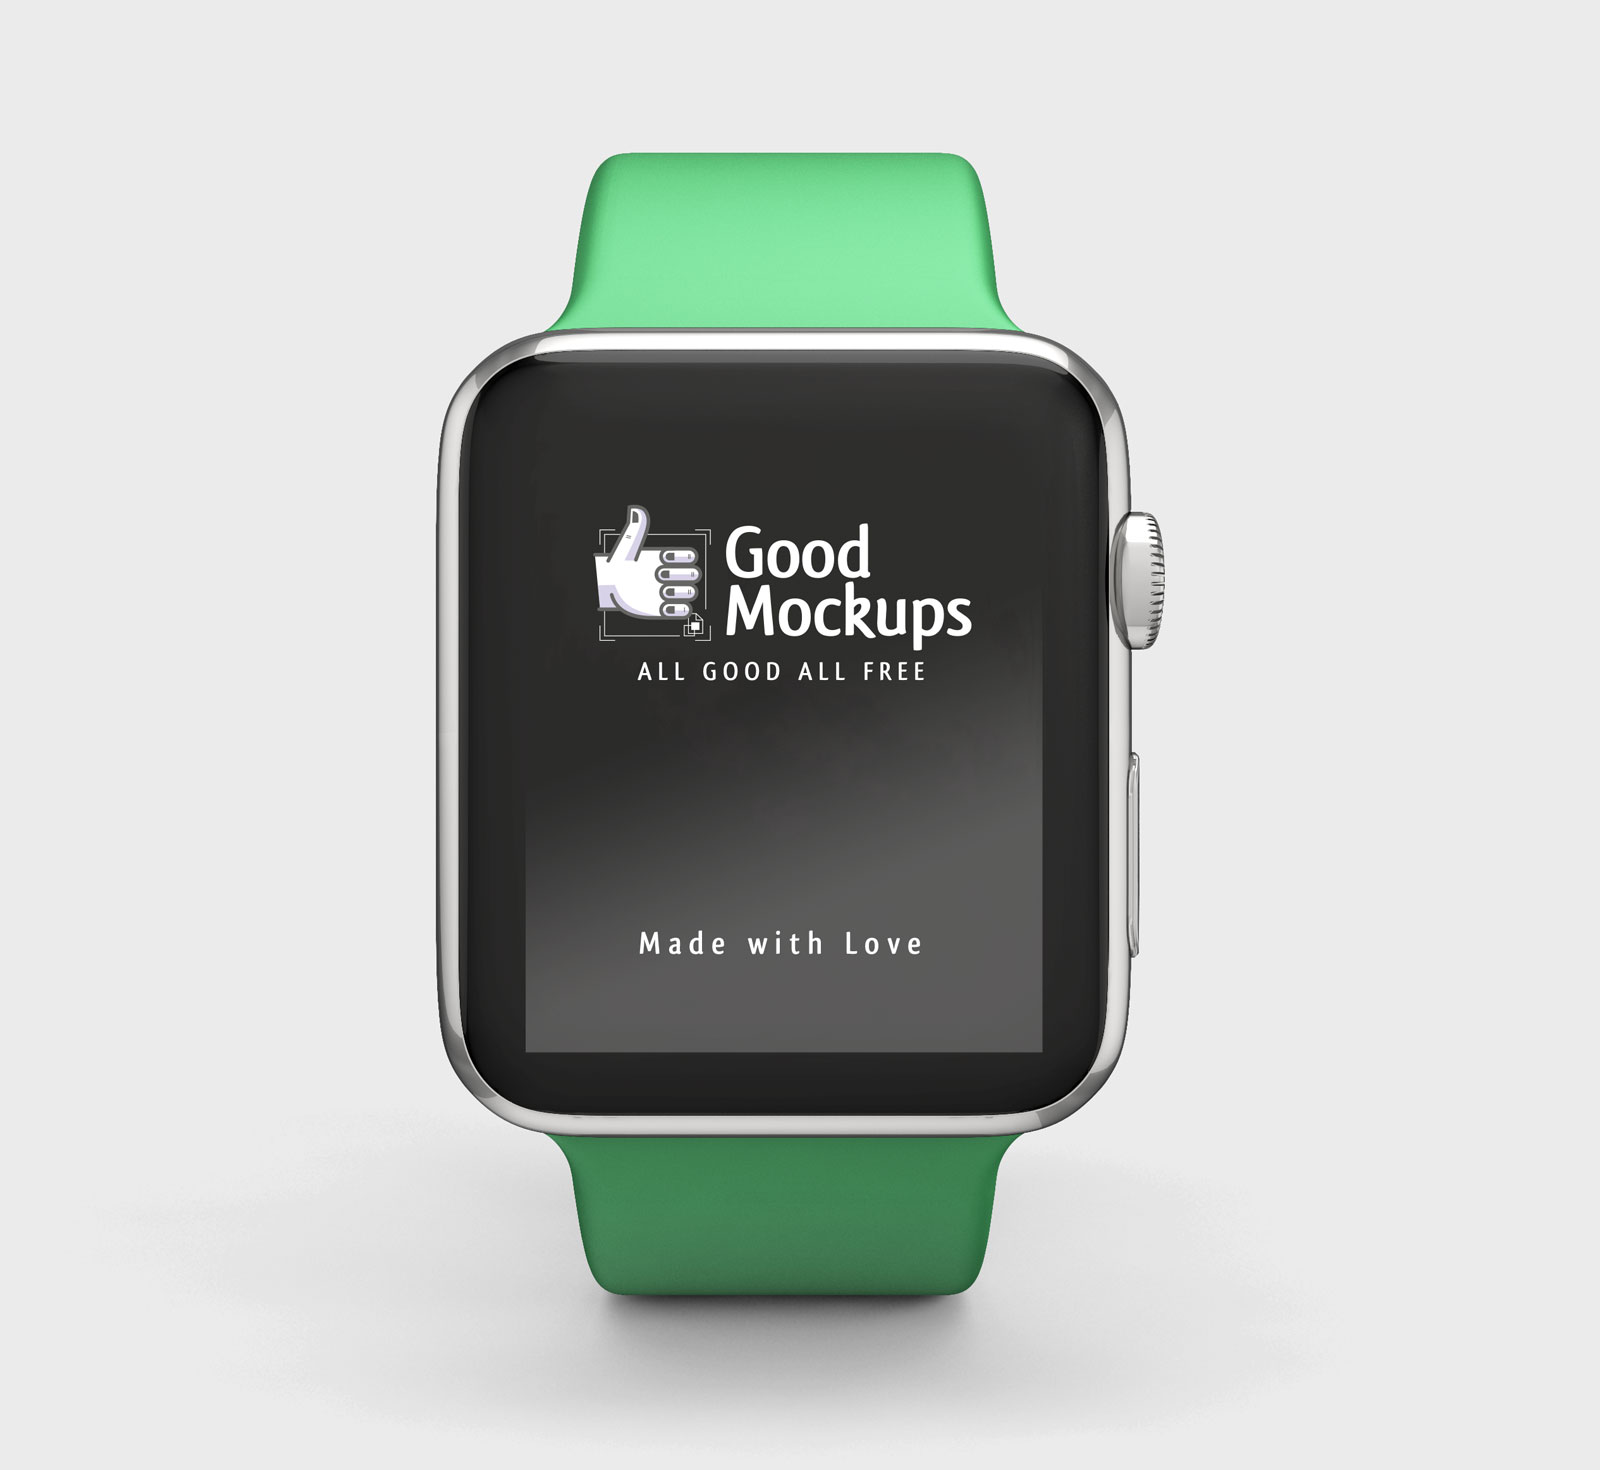 Download Free Apple Watch Mockup PSD with Changeable Sport Band Color - Good Mockups